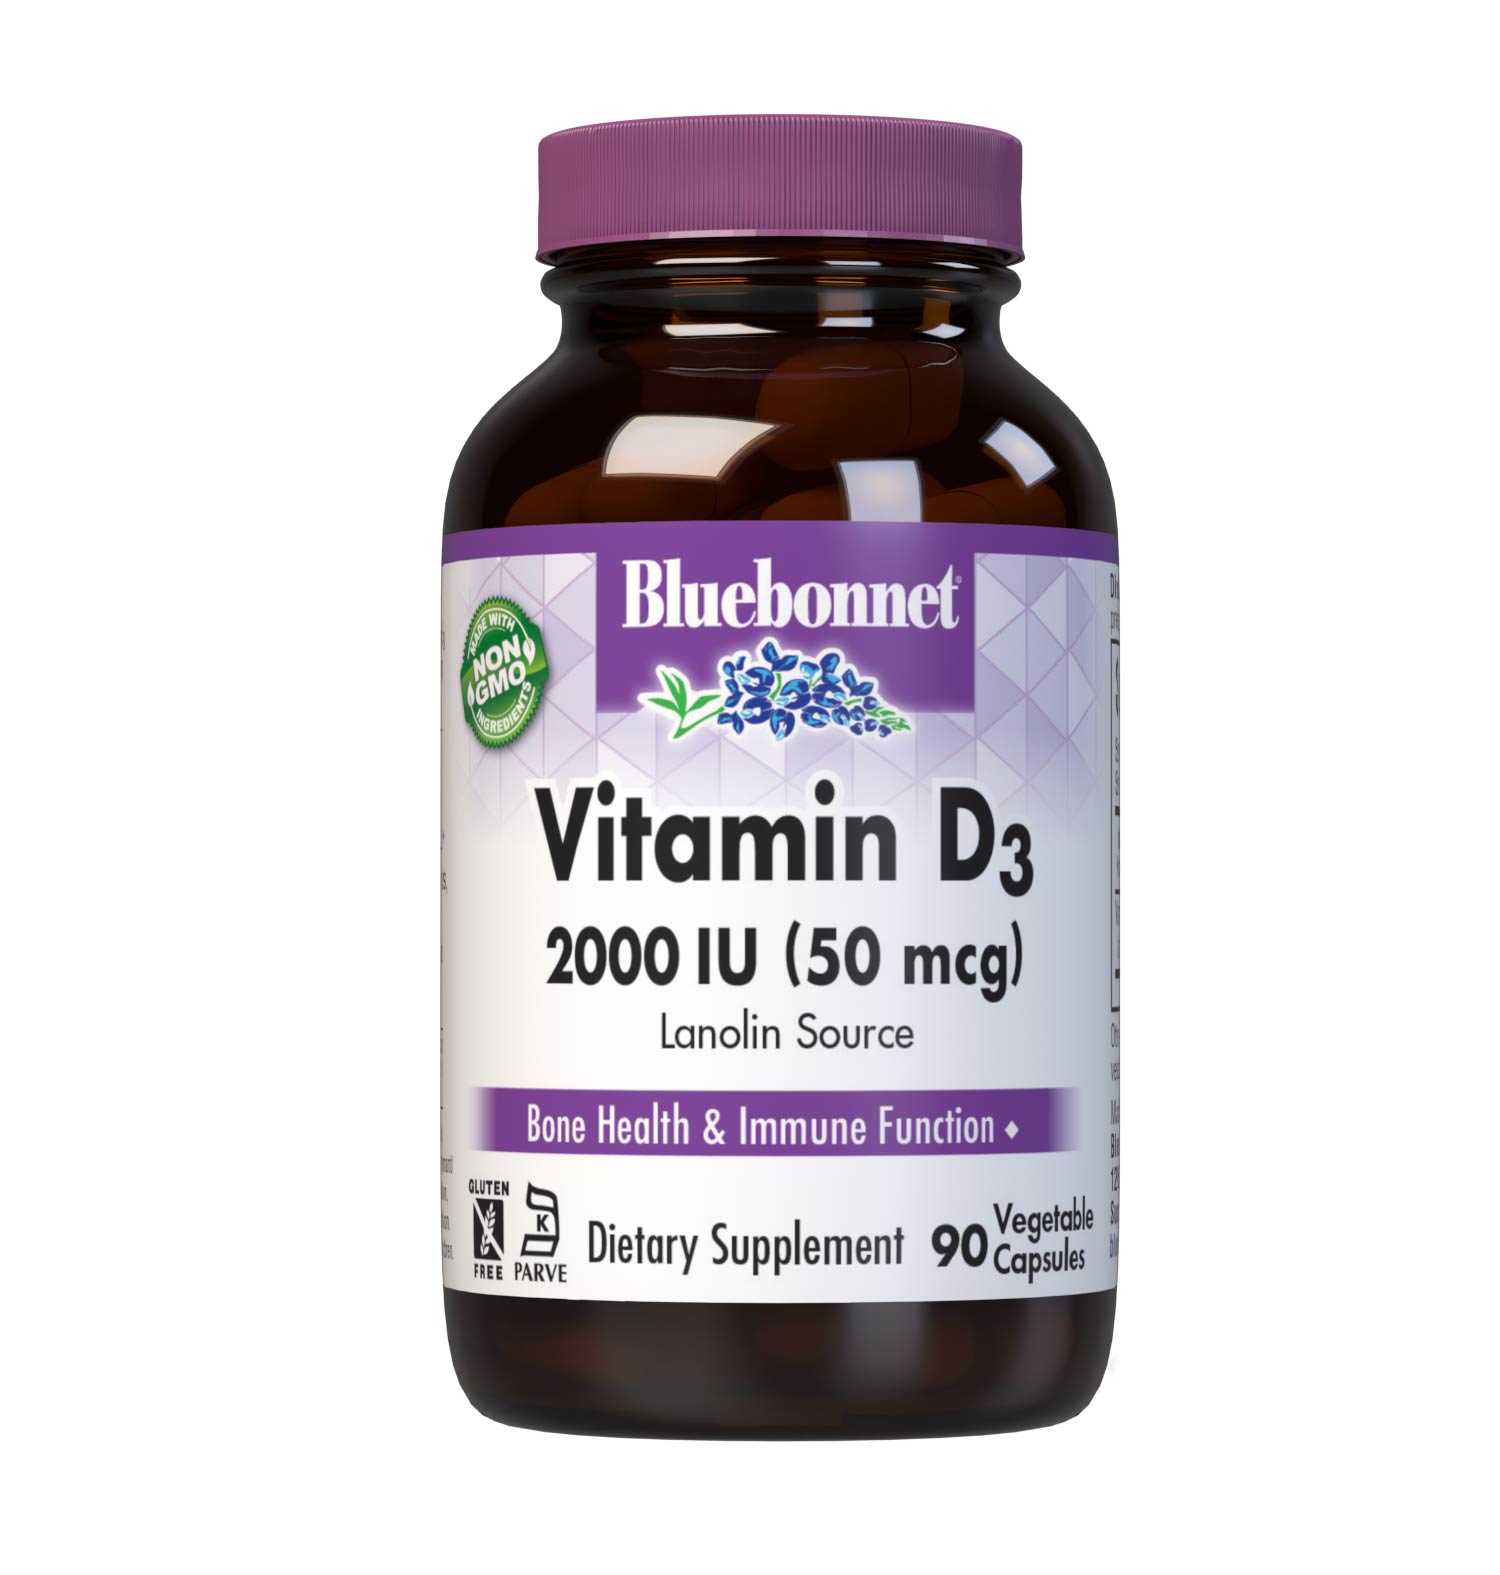 Bluebonnet’s Vitamin D3 2000 IU (50 mcg) Vegetable Capsules are formulated with vitamin D3 (cholecalciferol) from lanolin that supports strong healthy bones and immune function. #size_90 count